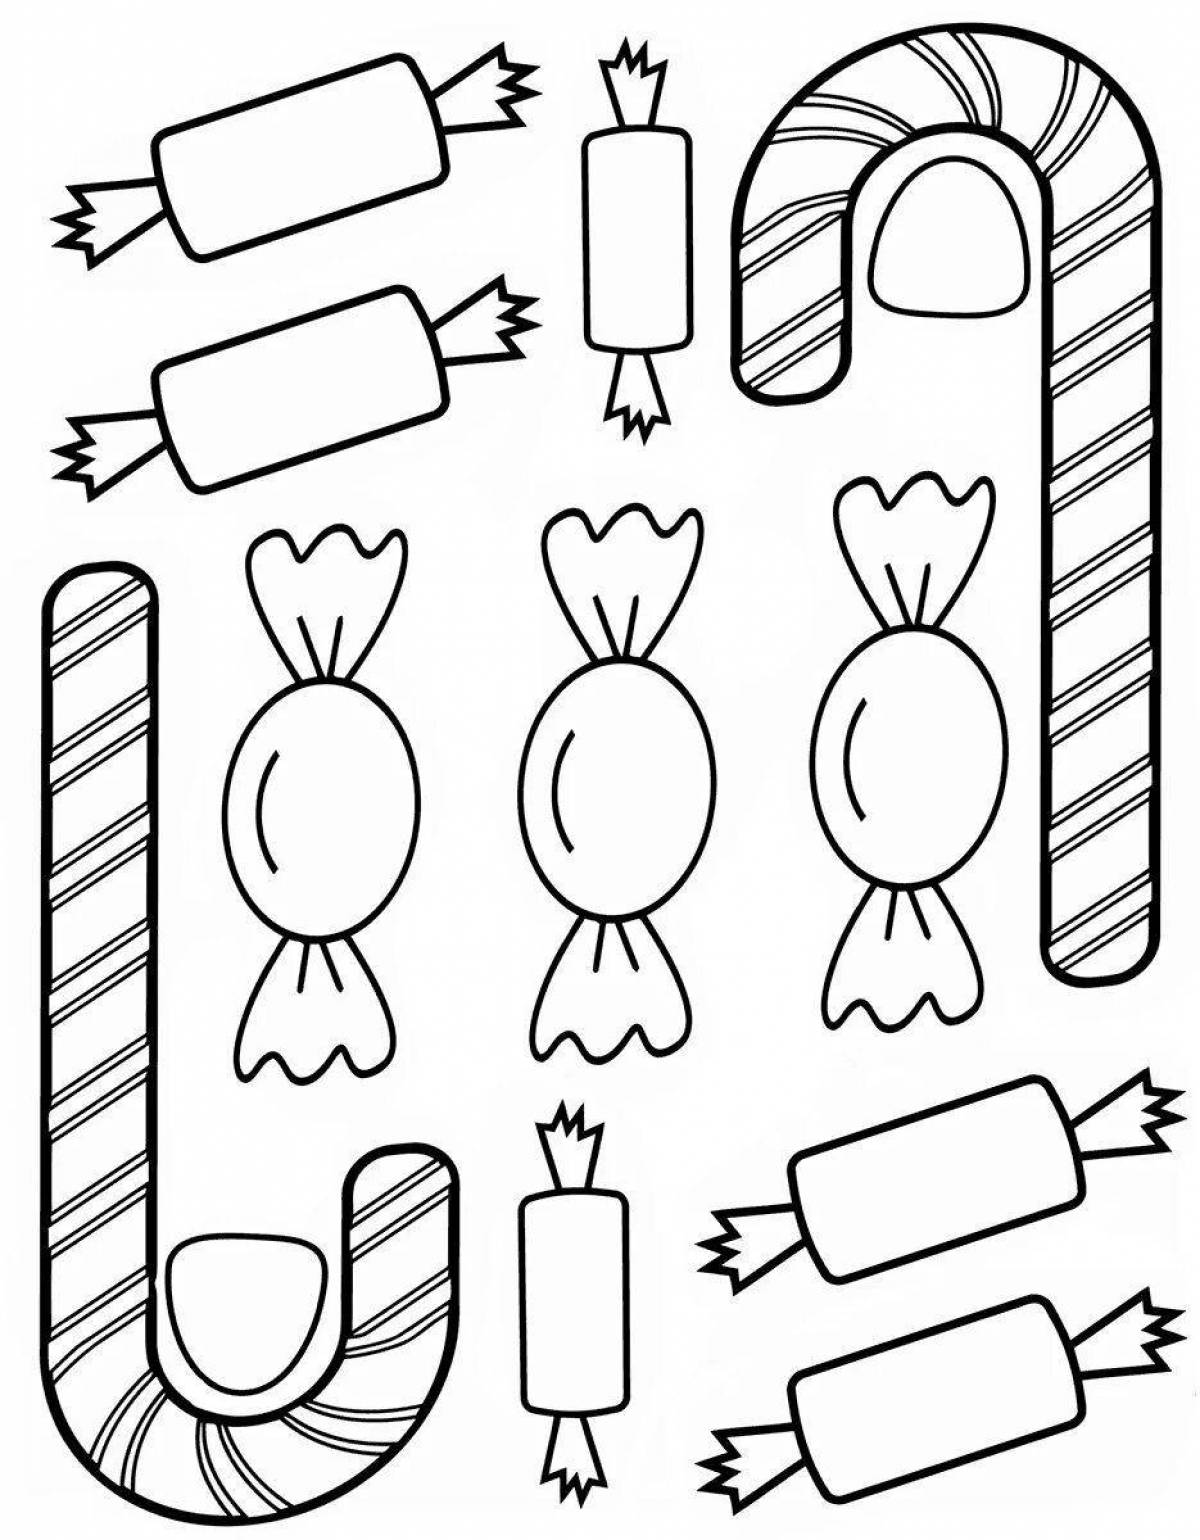 Fancy candy wrapper coloring book